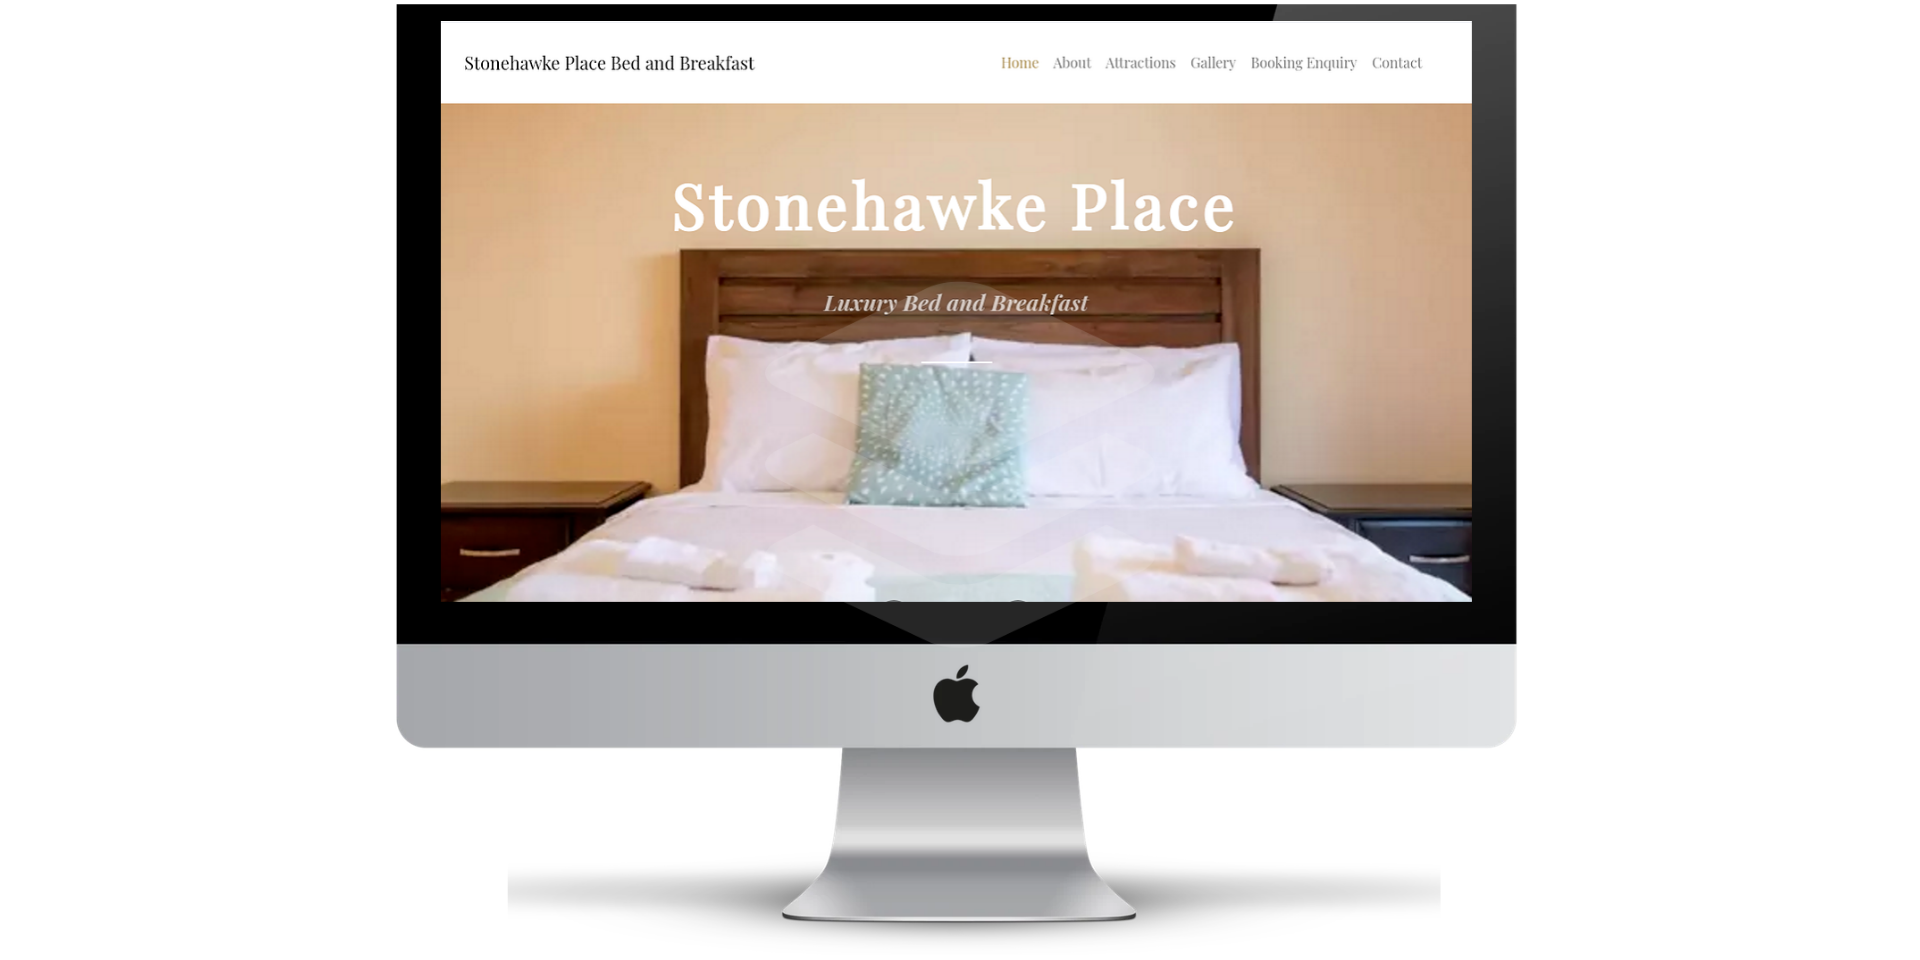 Stonehawke Place Bed and Breakfast